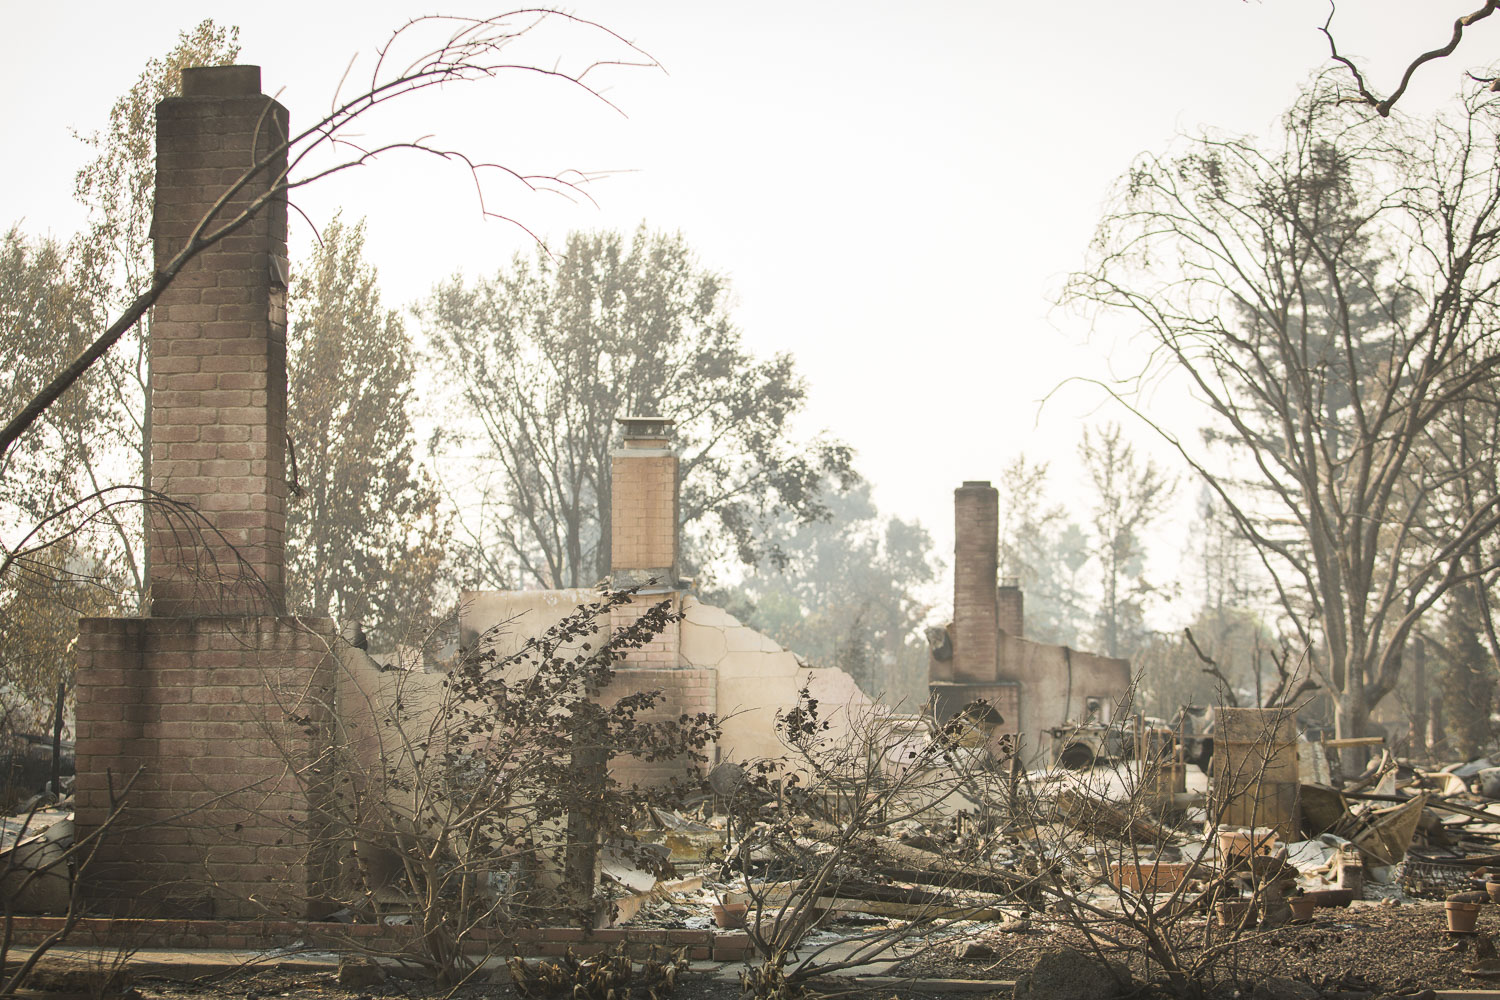  Fire aftermath in the Coffey Park neighborhood Oct. 13, 2017 in Santa Rosa, CA. 